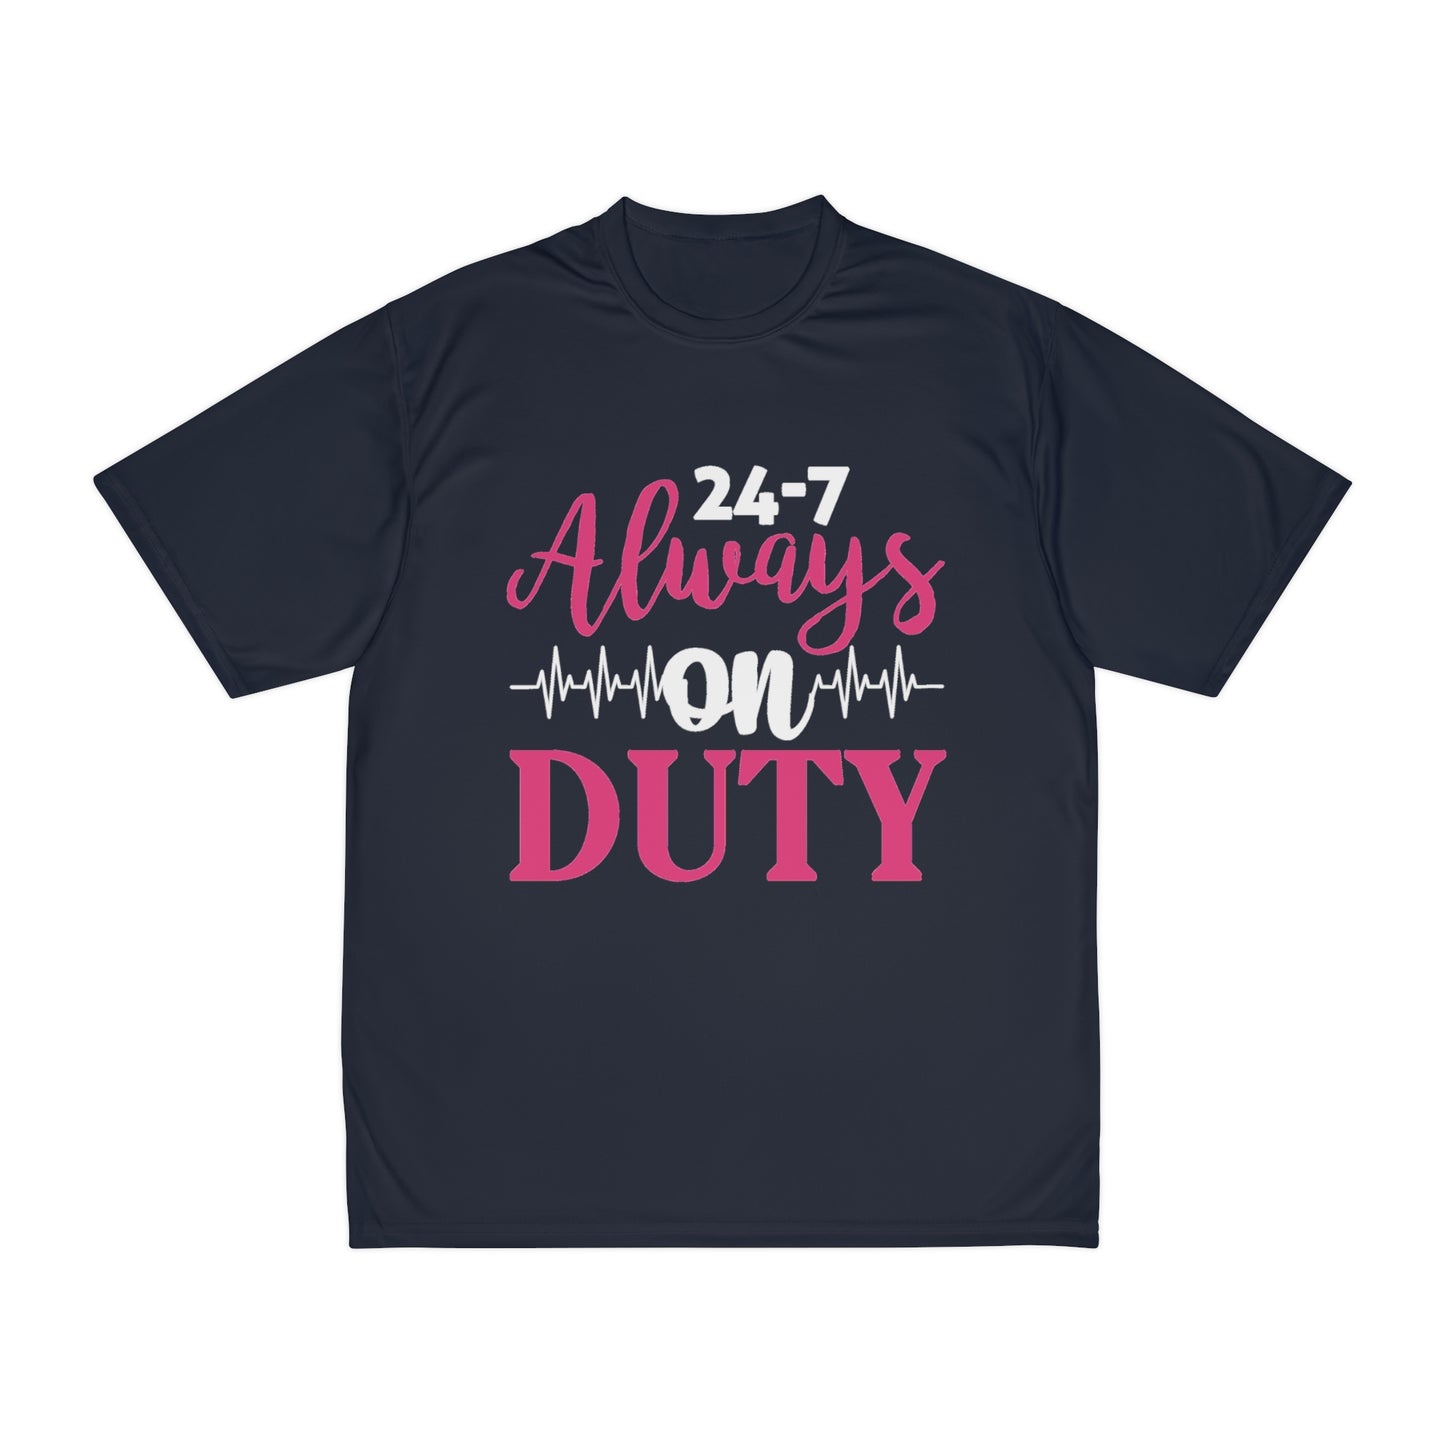 24-7 Always On Duty Performance T-Shirt, Doctor shirts, Doctor gift ideas, New Doctor shirt, Future doctor shirt, gift for doctors